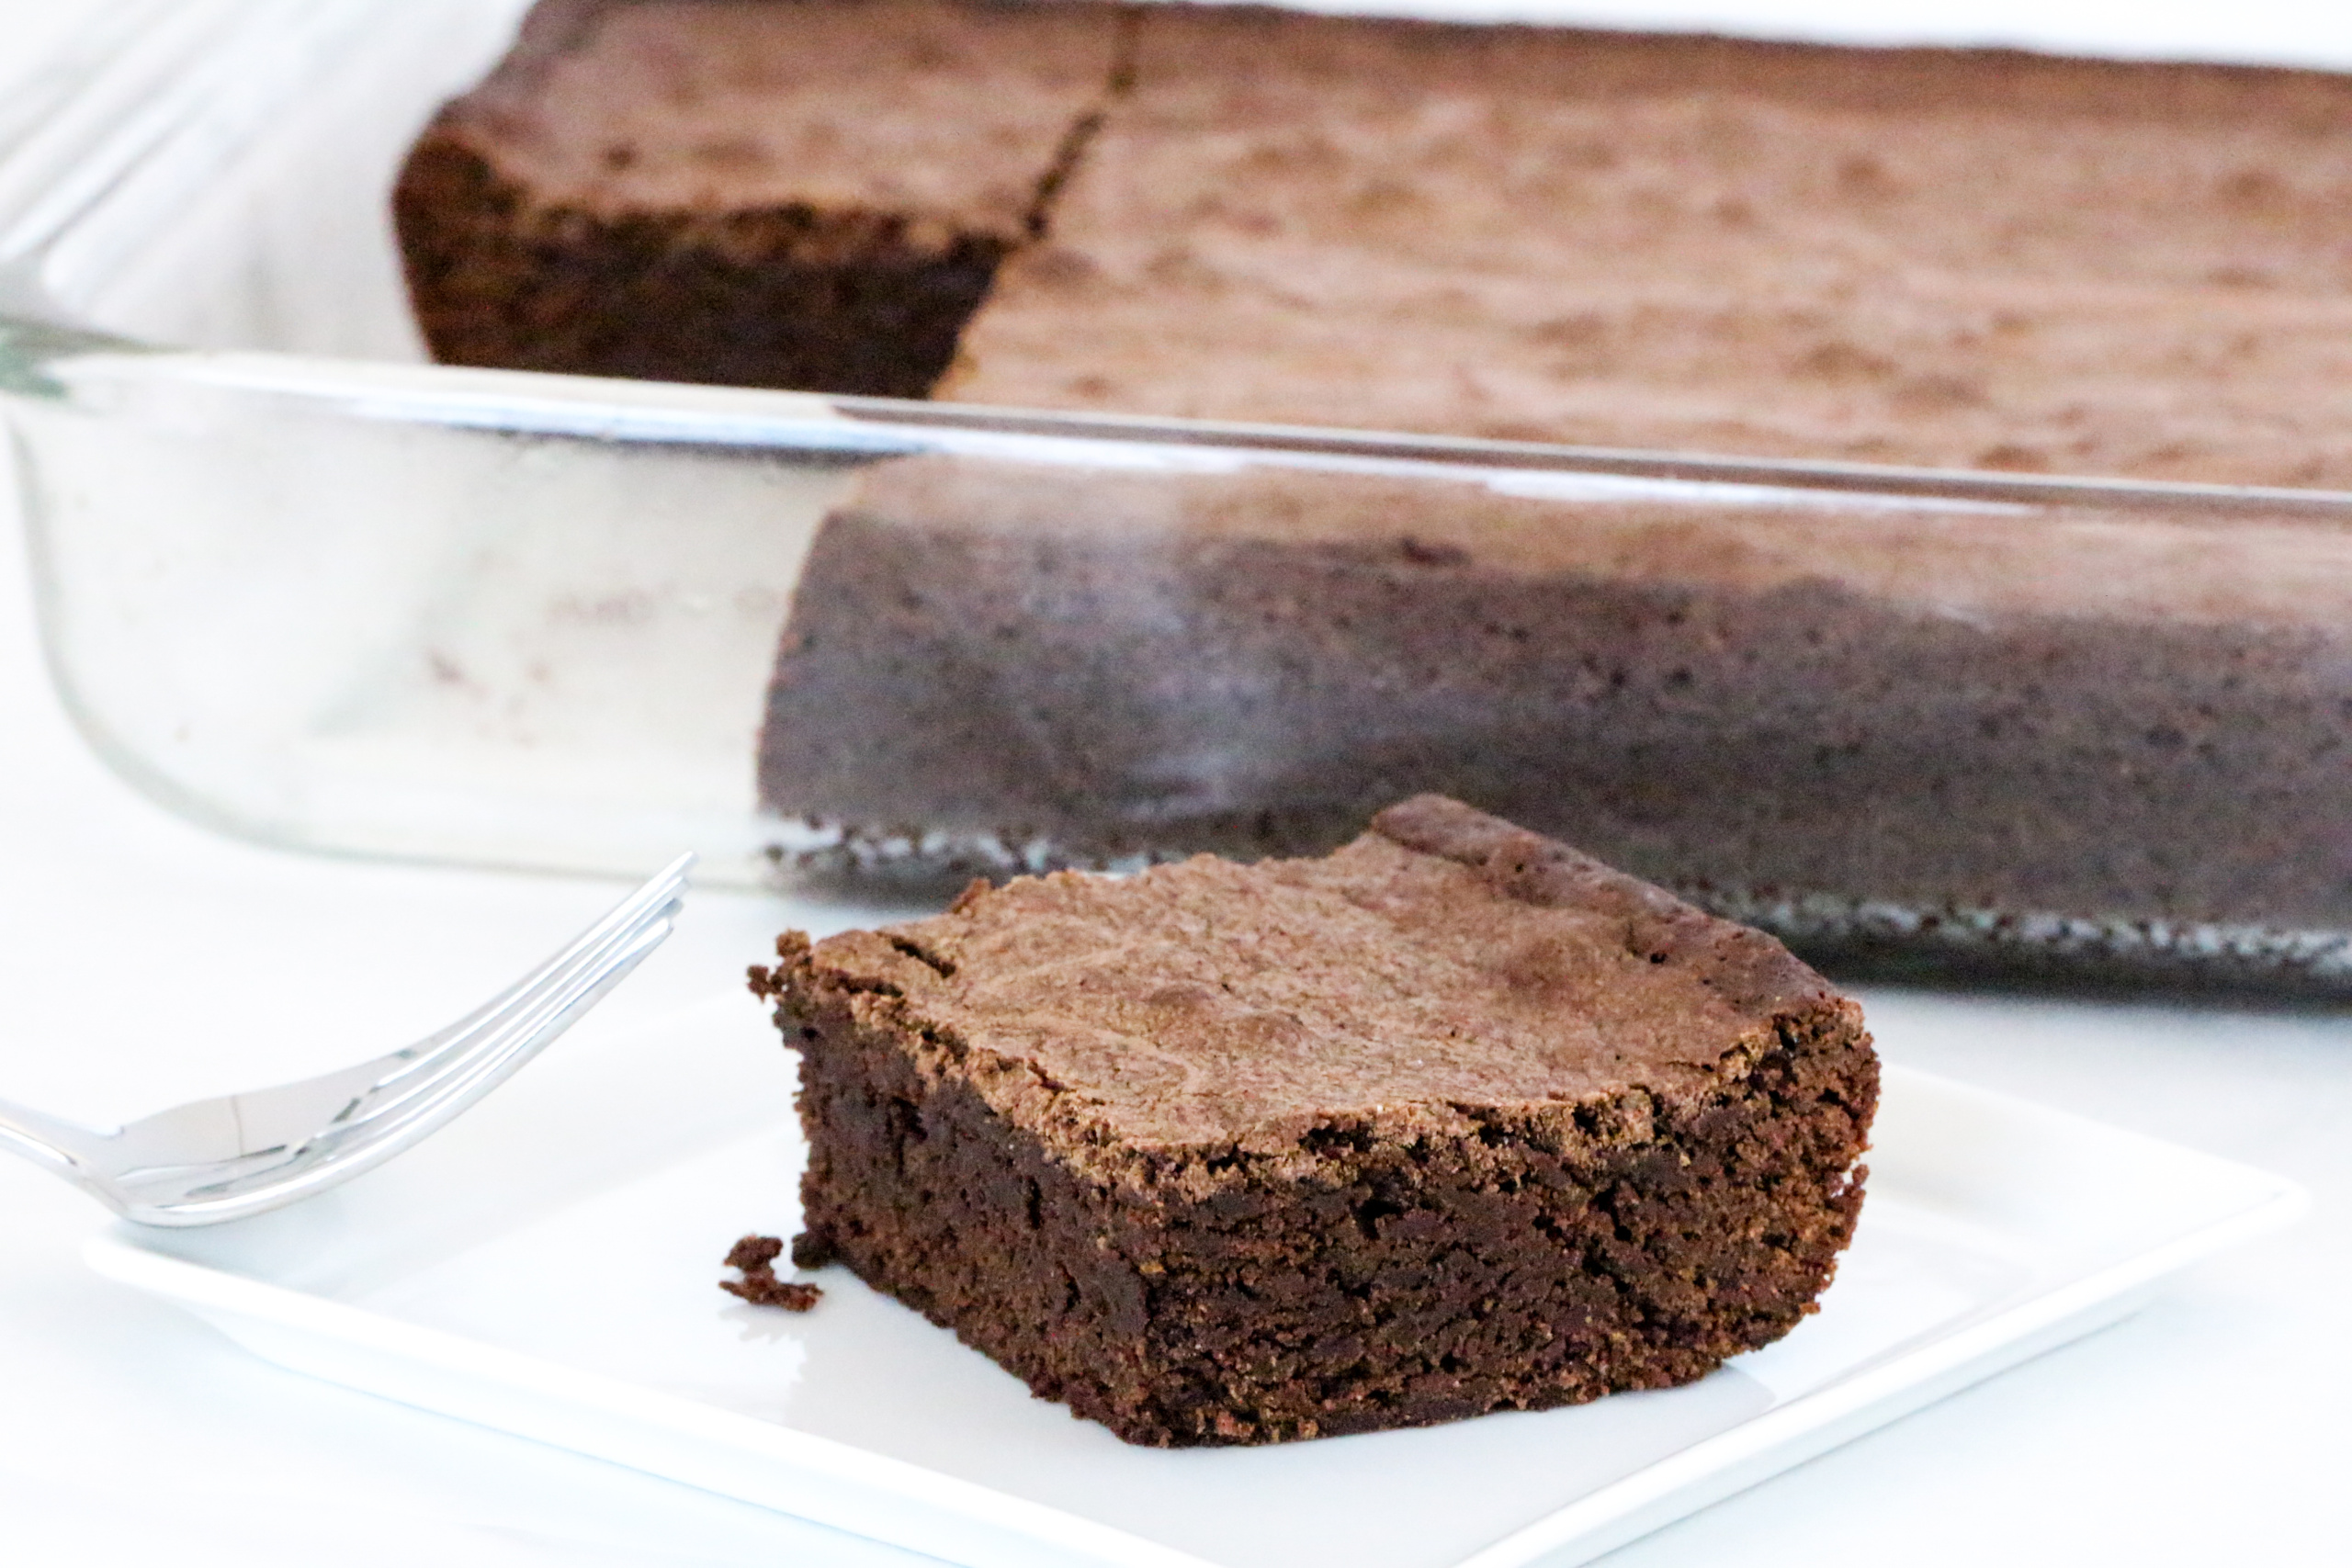 Rich and thick, almost like fudge, Olga's Brownies are scrumptious treats that will satisfy the most avid chocoholic! And cleanup is a breeze since the recipe uses only 1 saucepan to whisk the ingredients together. Recipe shared with permission granted by Barbara Ross, author of SEALED OFF. 